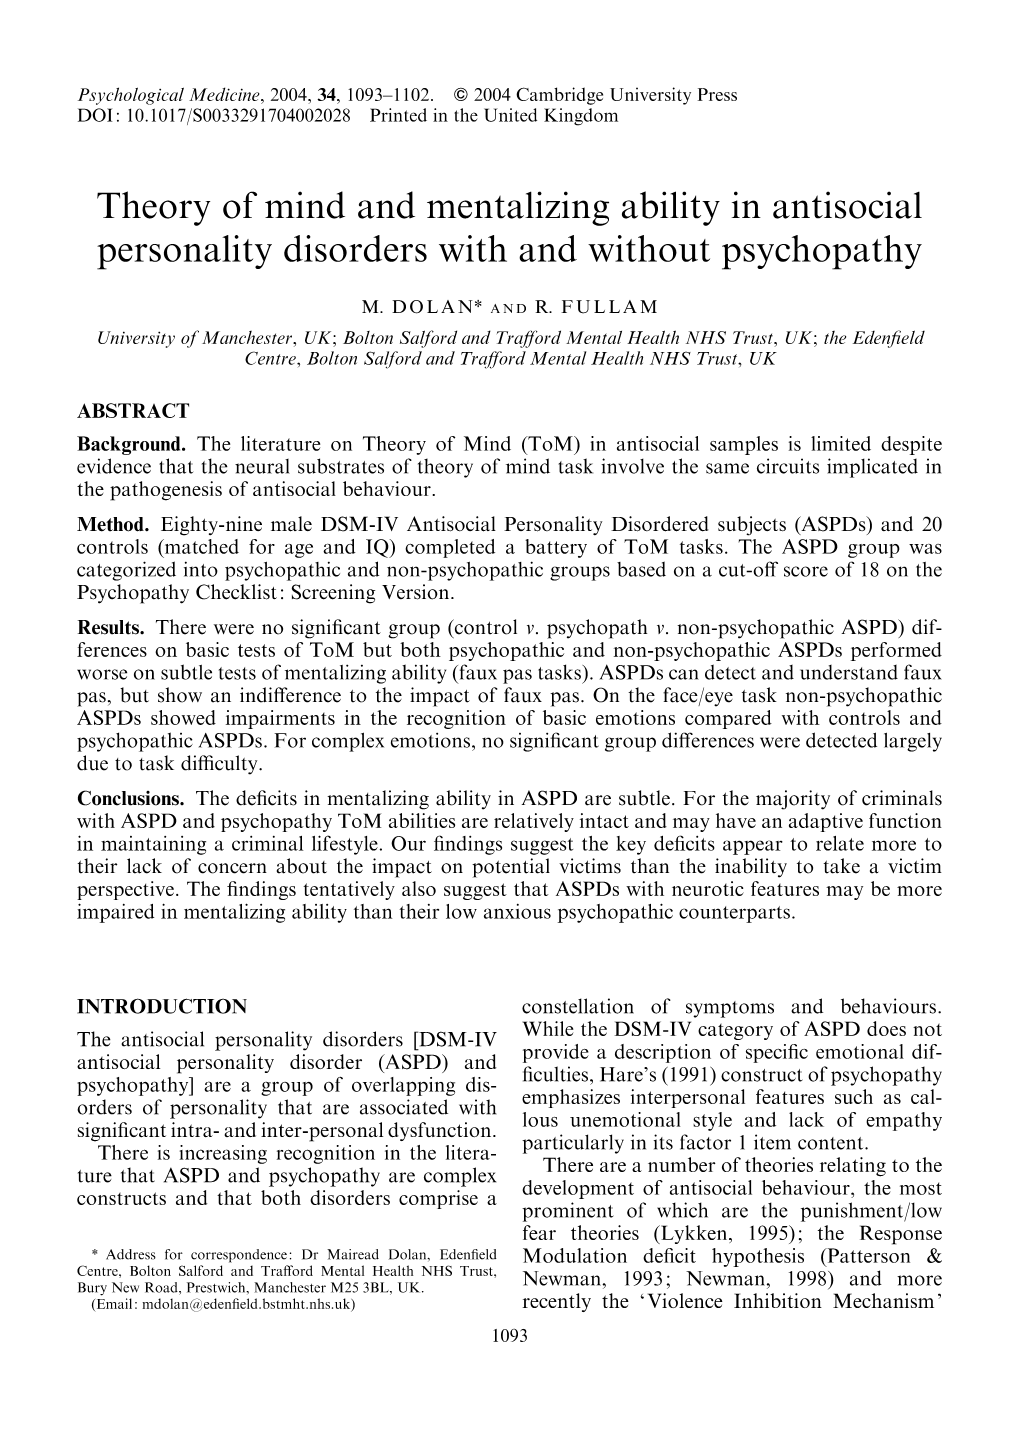 Theory of Mind and Mentalizing Ability in Antisocial Personality Disorders with and Without Psychopathy